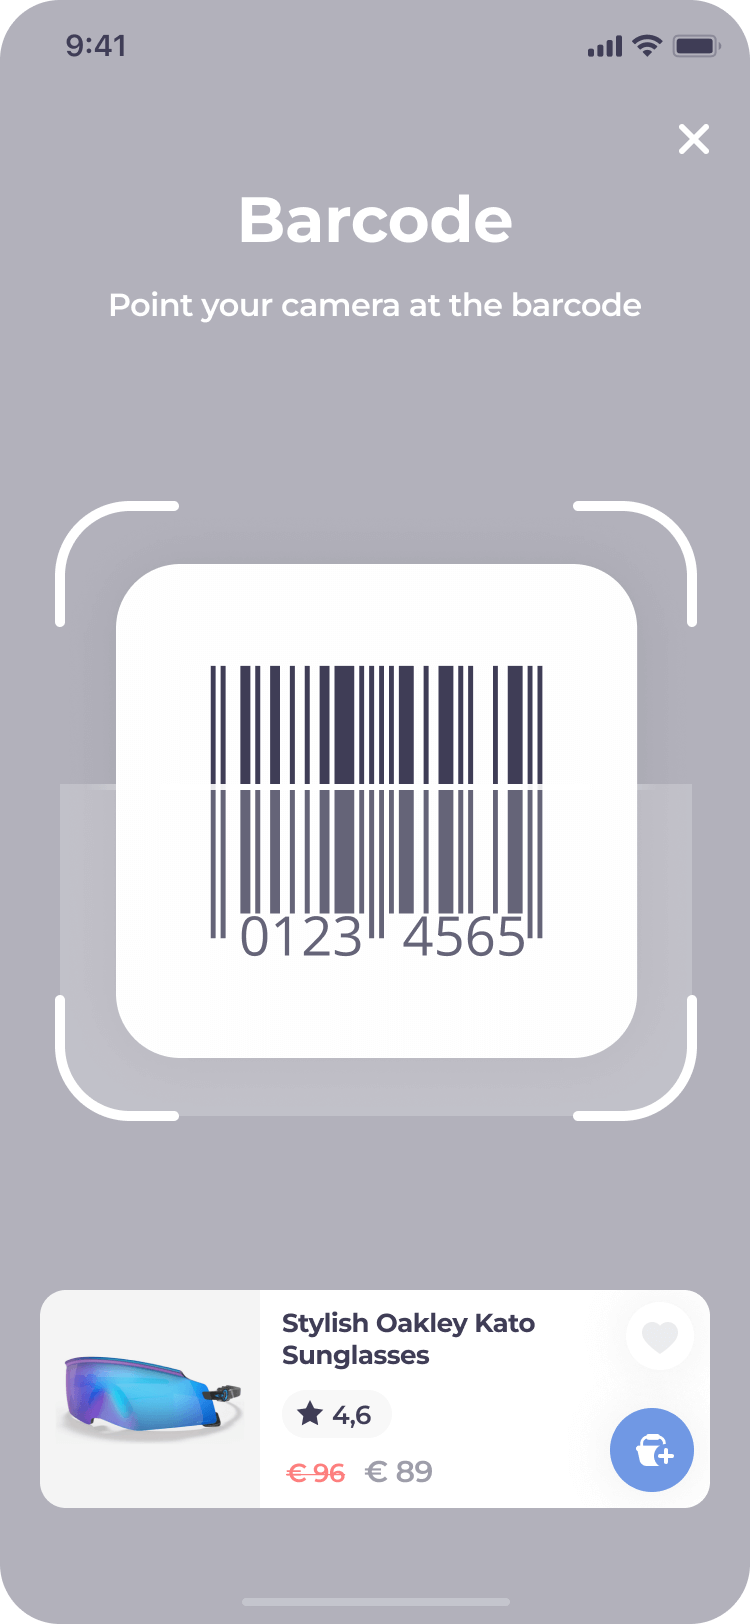 Search for a product by barcode